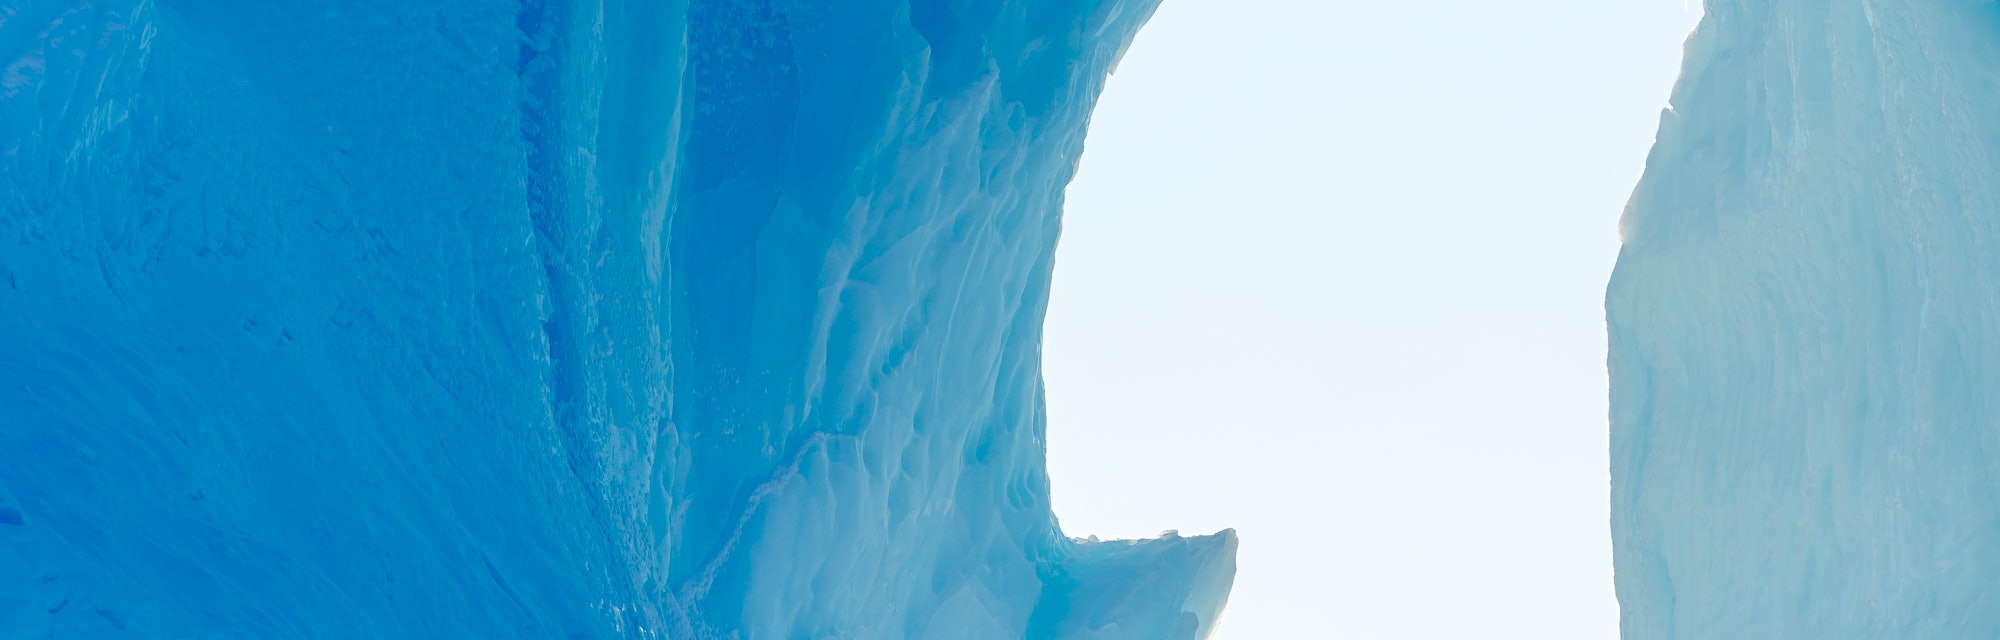 Iceberg frozen into the sea ice of the Uummannaq fjord system during winter in the the north west of...